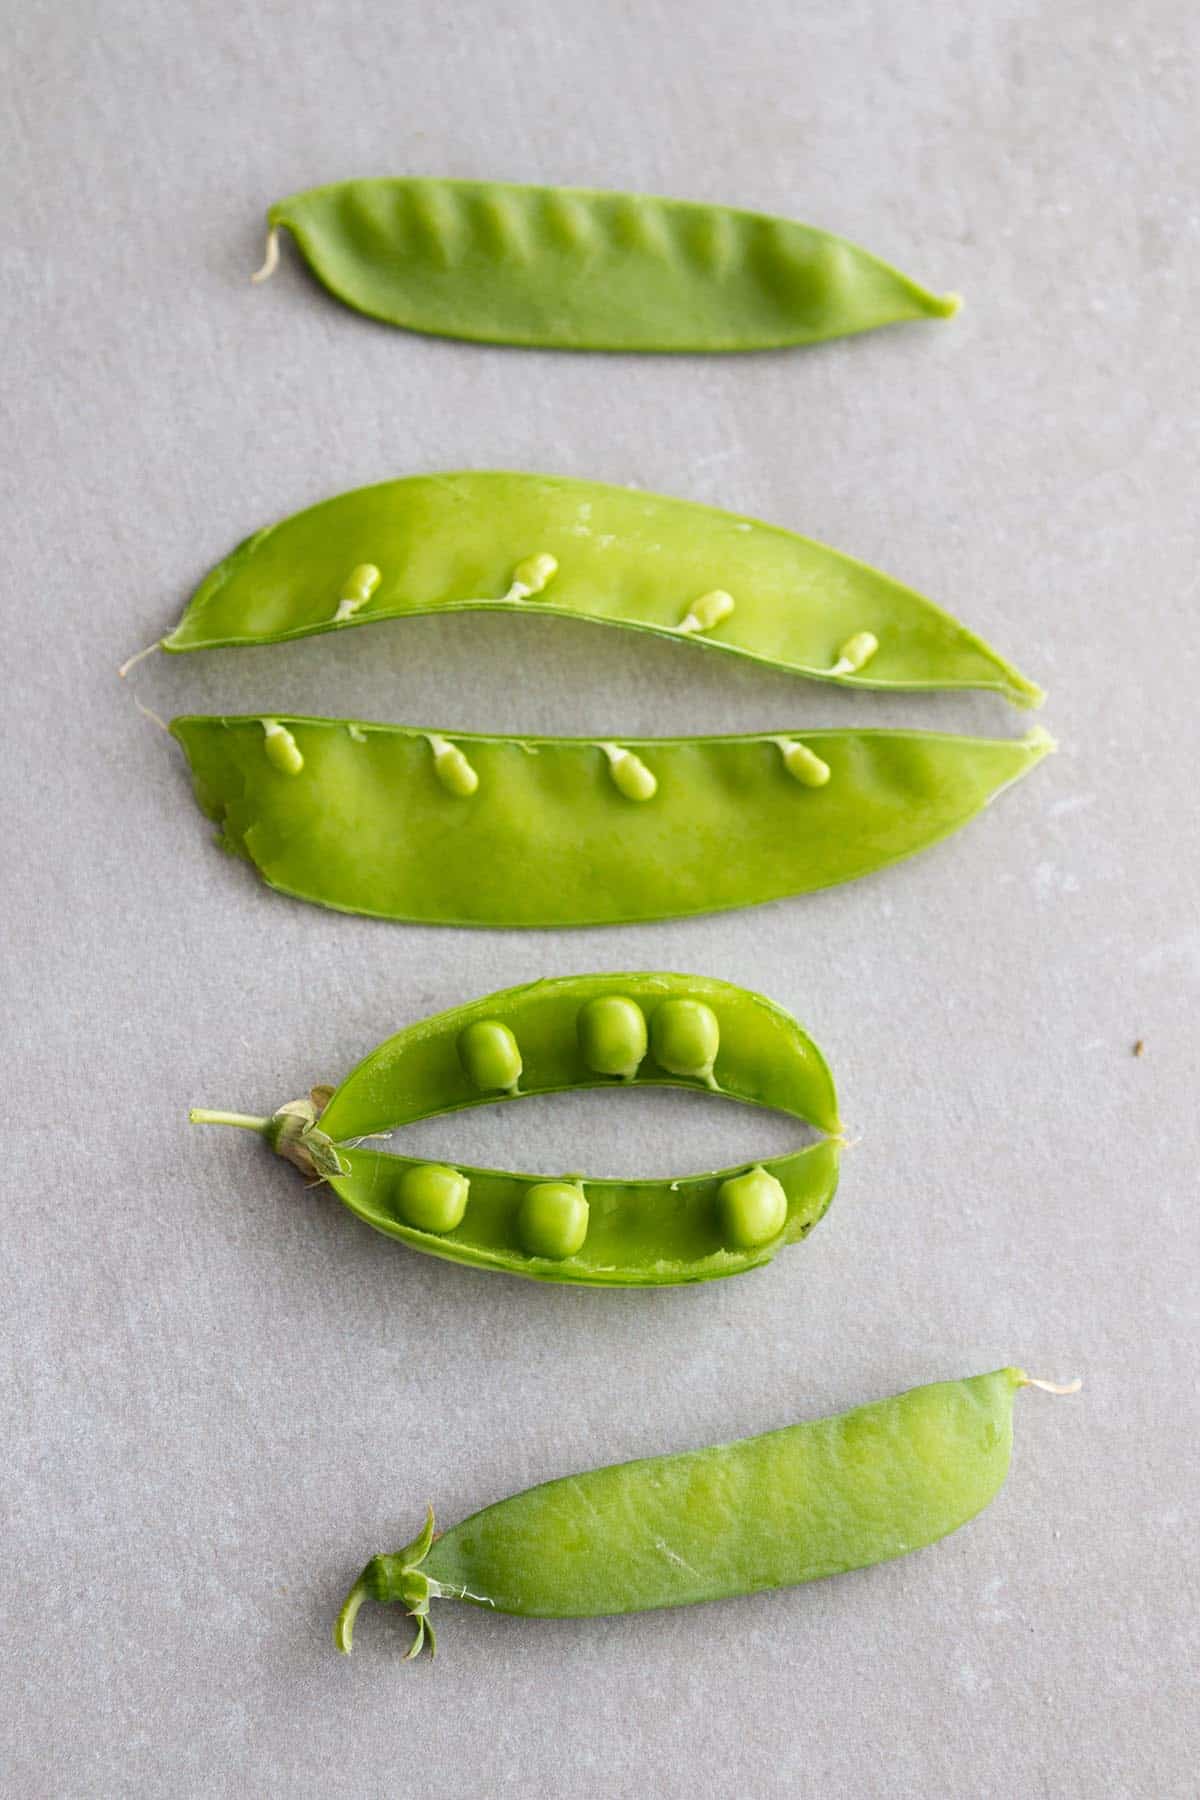 Four peas. Two whole and two split open showing the peas inside.
